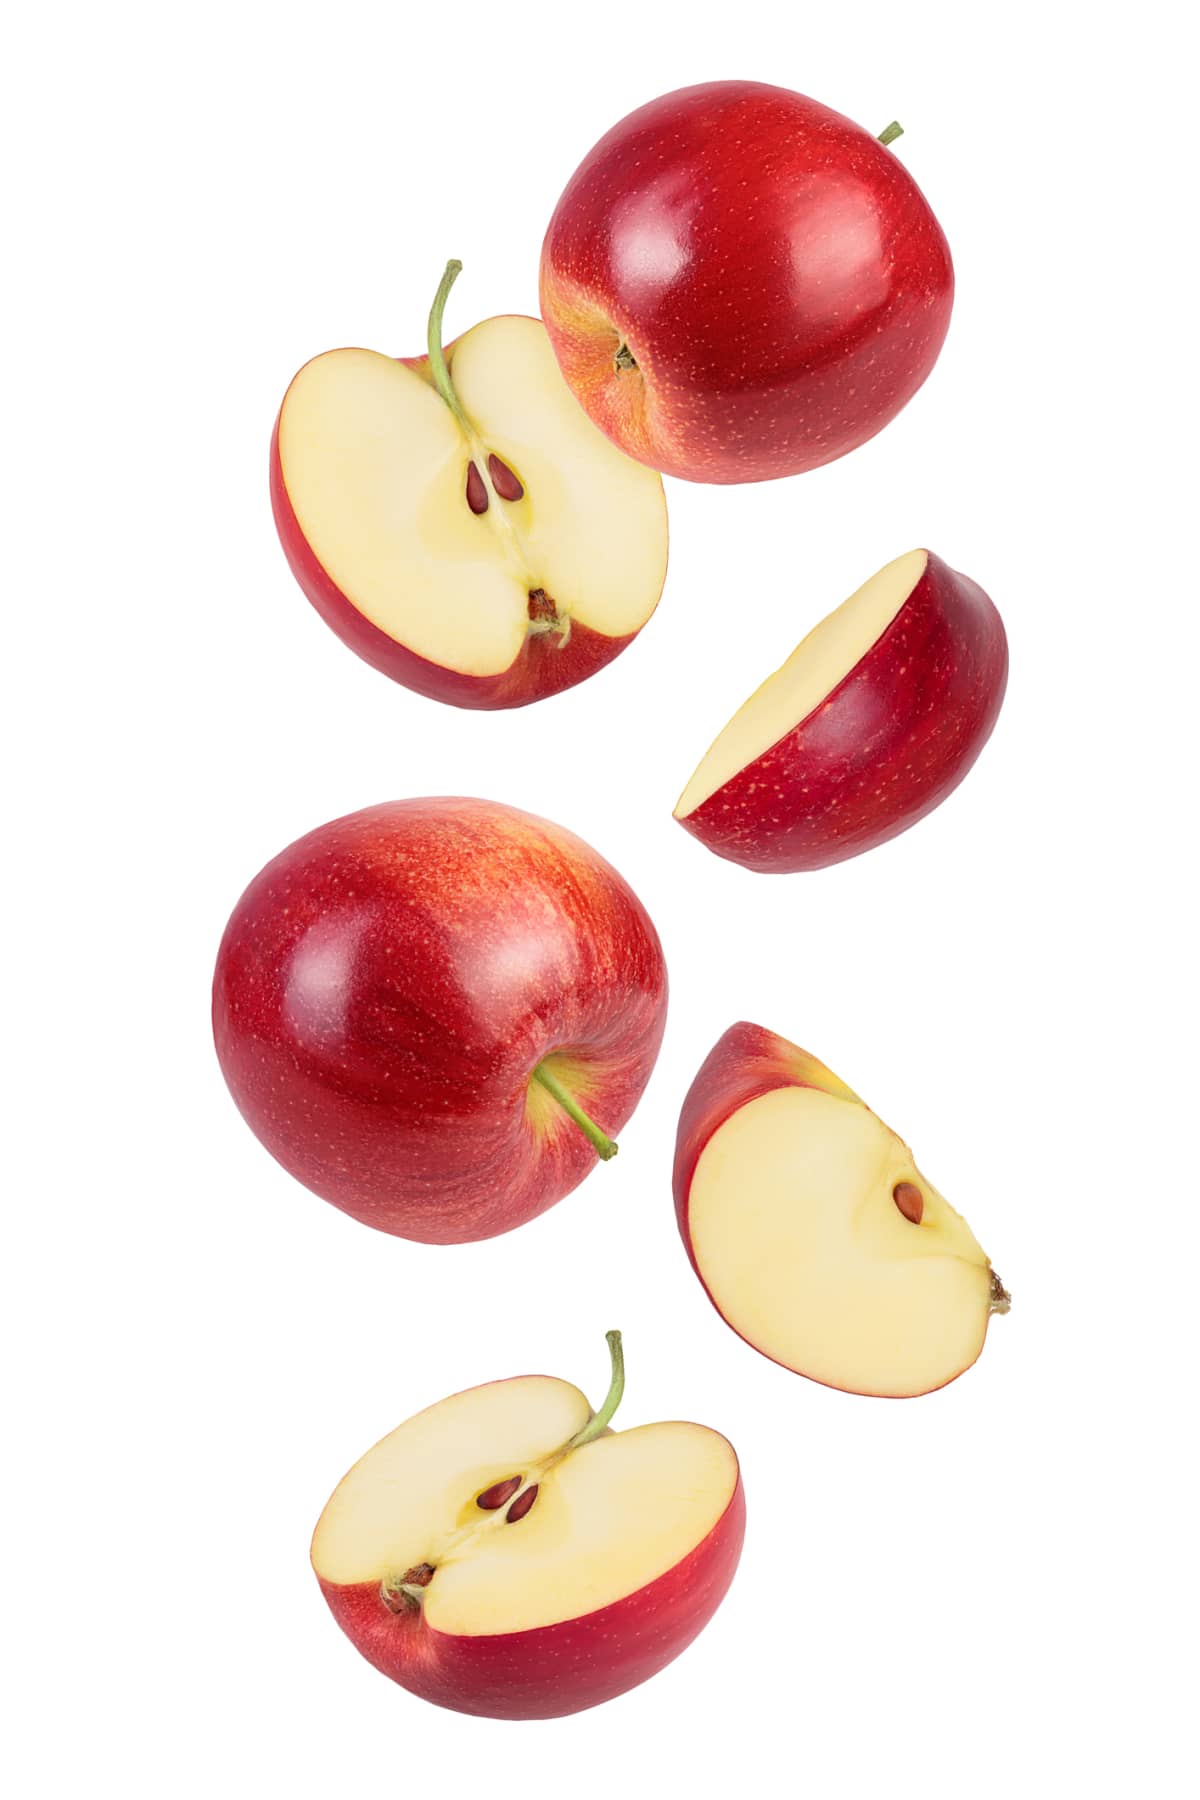 Falling red apple slice isolated on white background with clipping path.